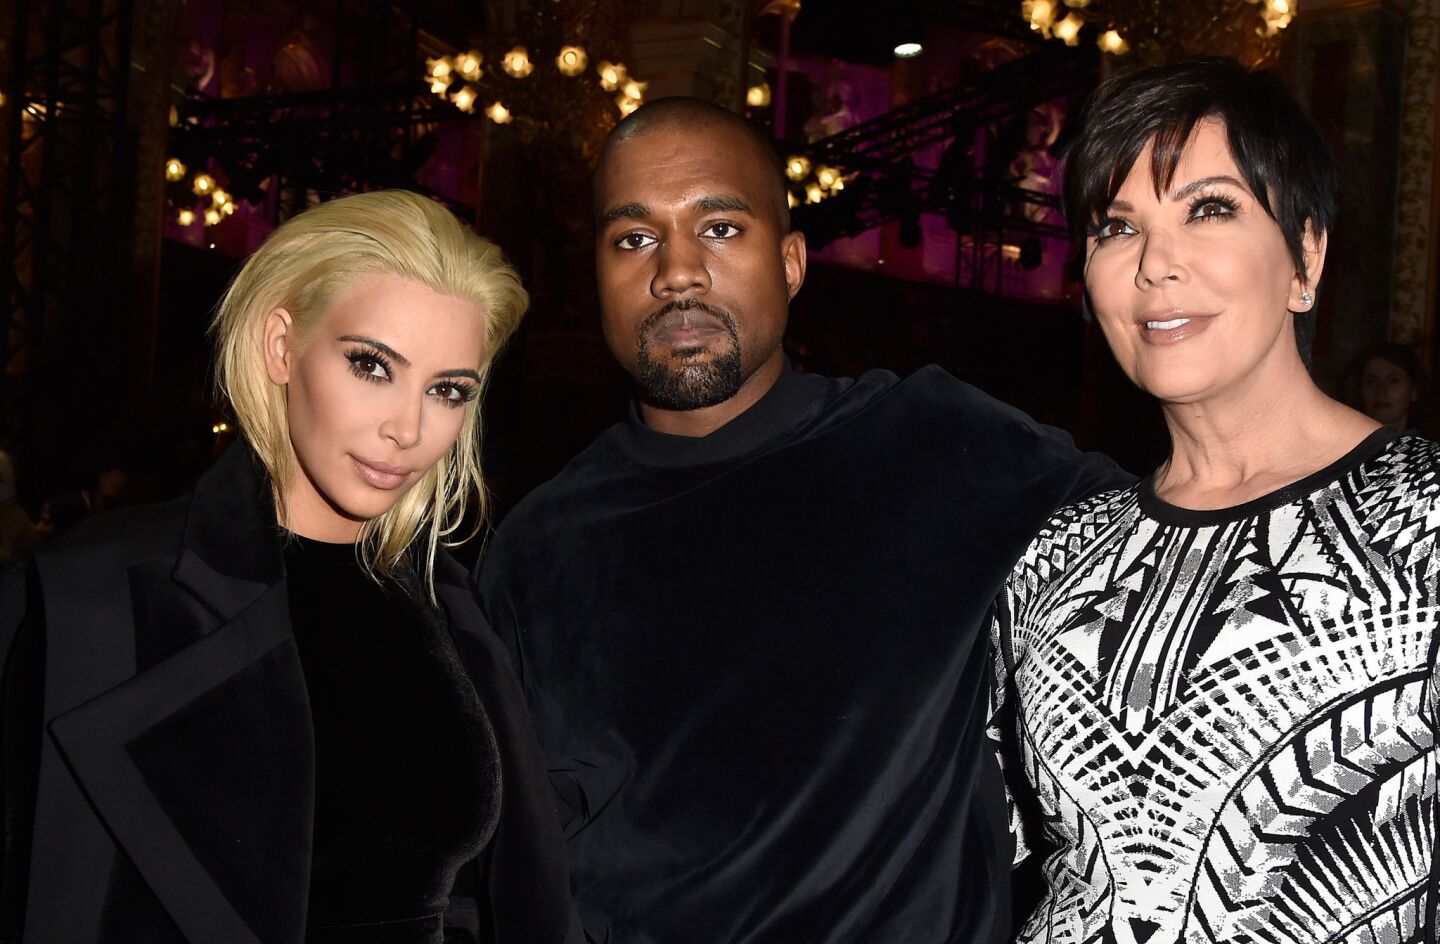 Kardashian, West and her mother Kris Jenner attend the Balmain show in Paris on March 5, 2015.